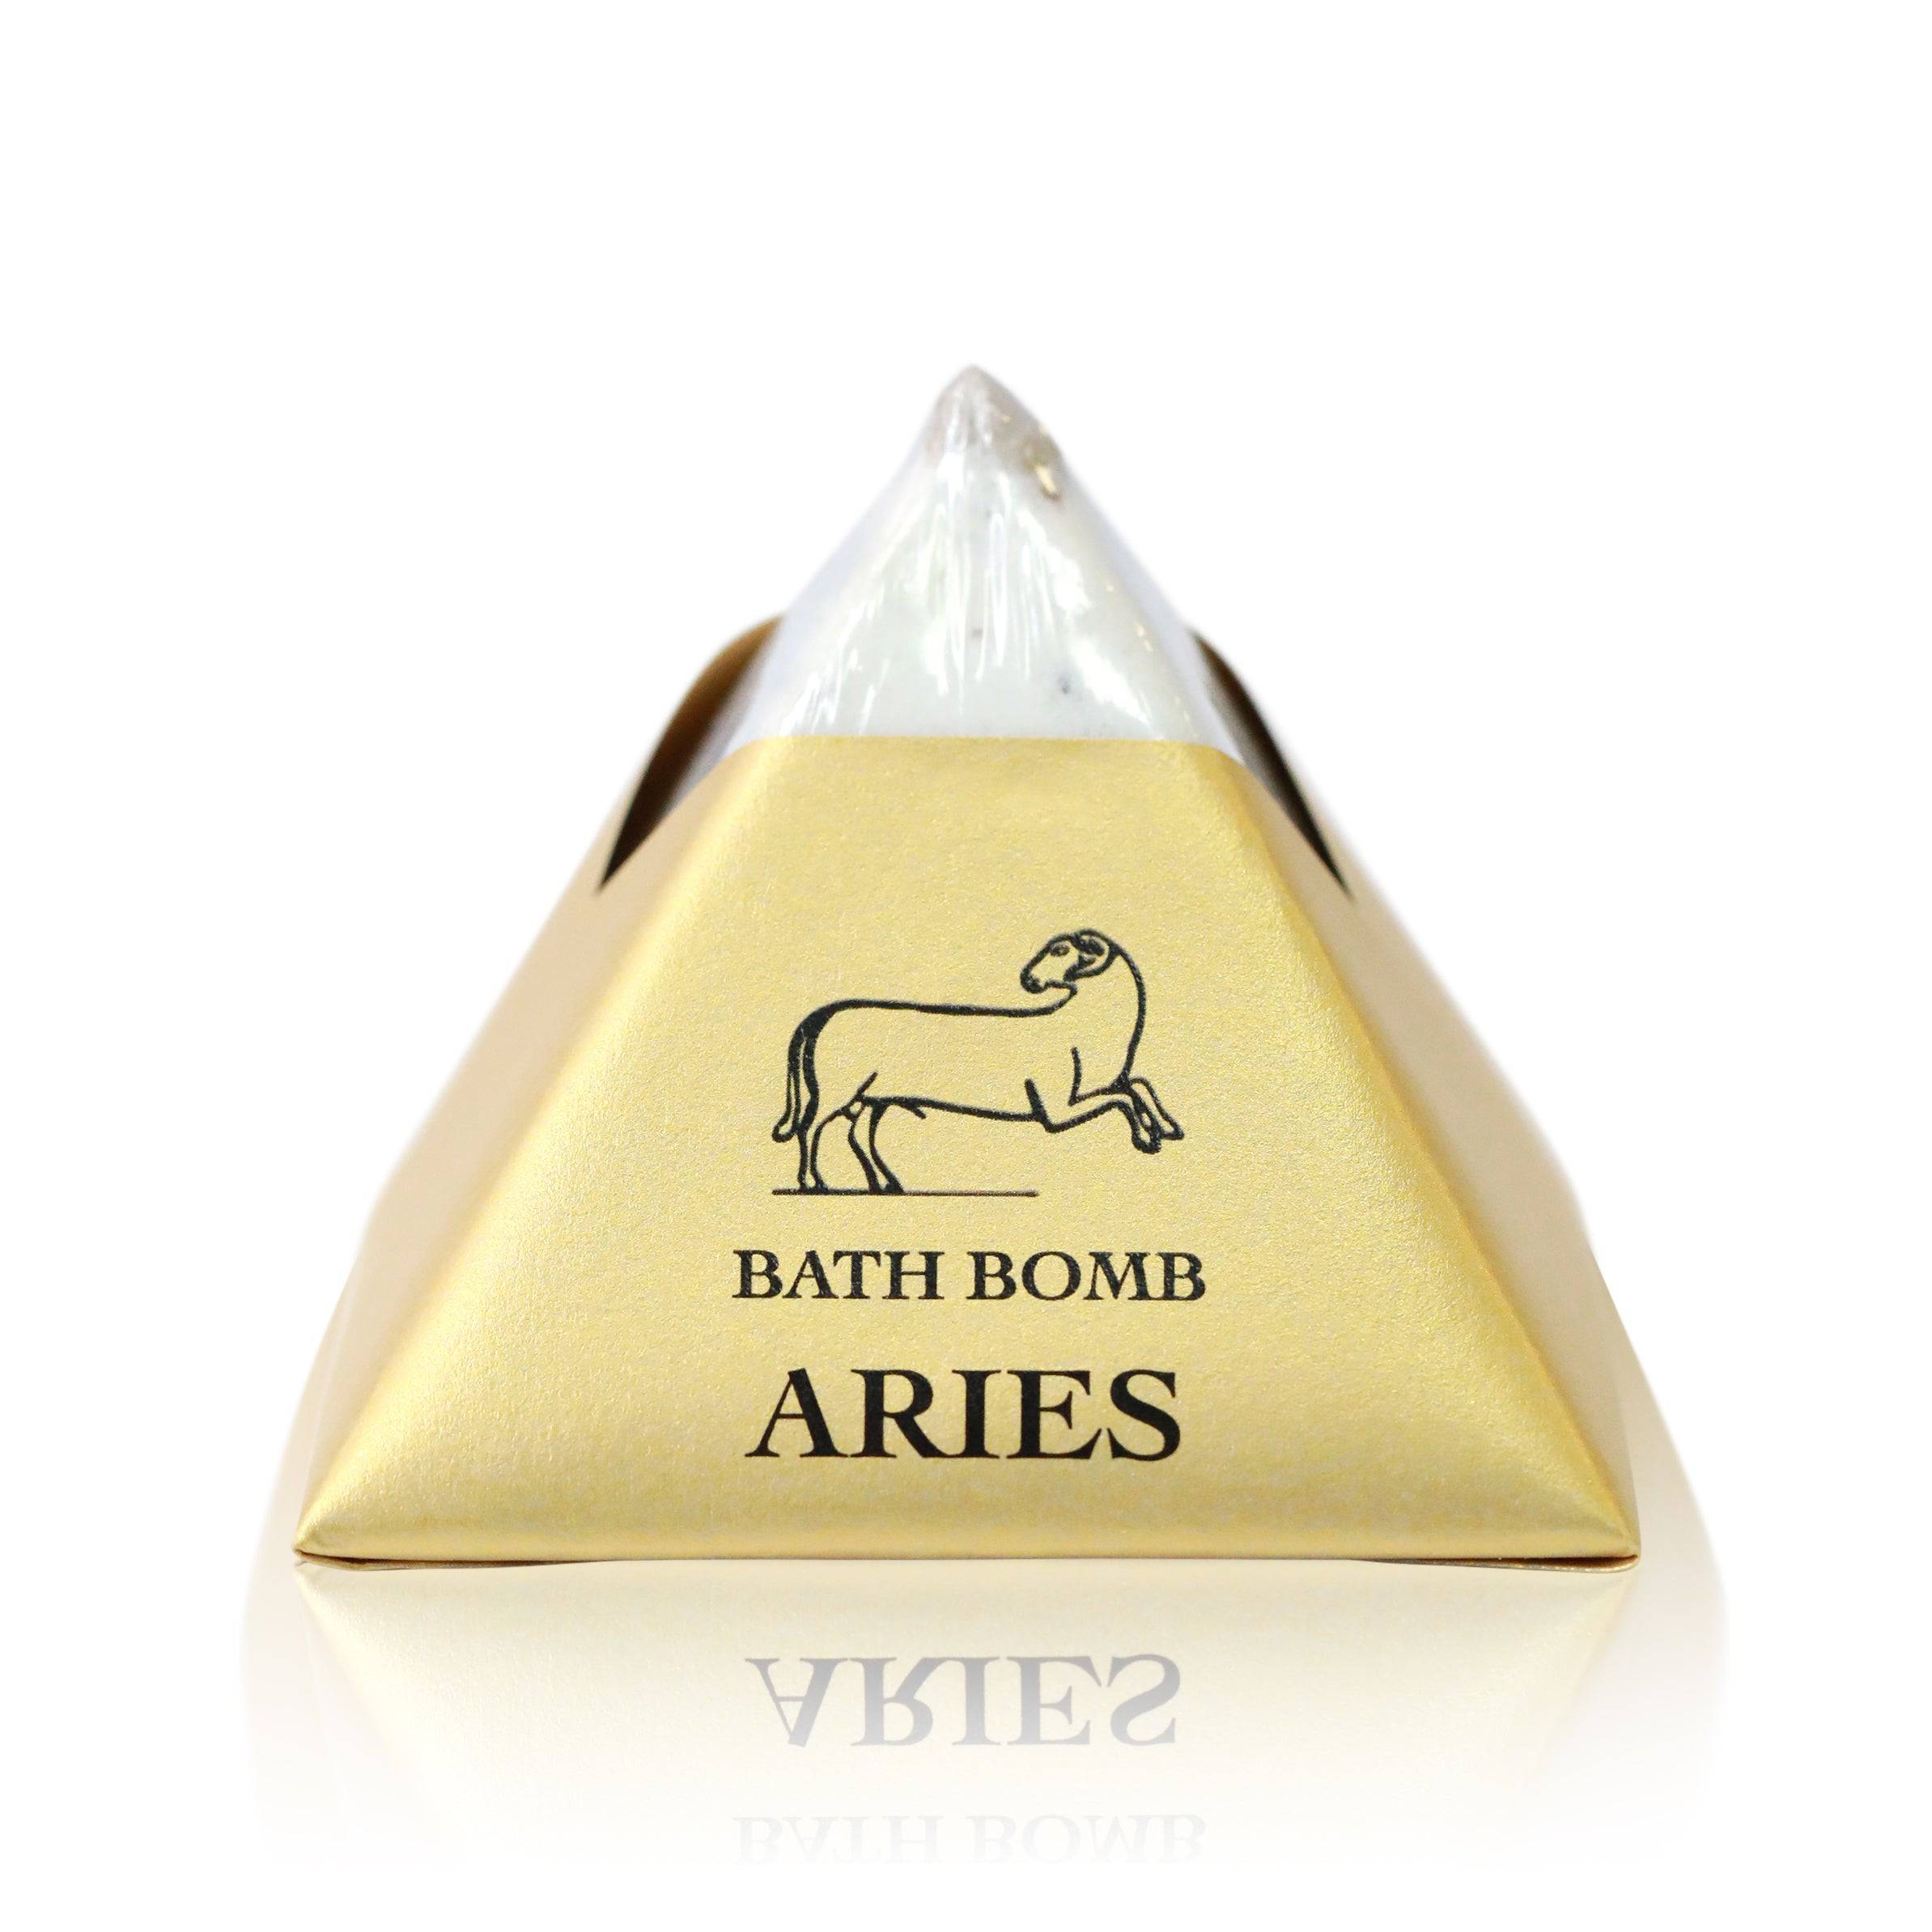 Aries Zodiac Sign Pyramid Bath Bomb - The Gilded Witch